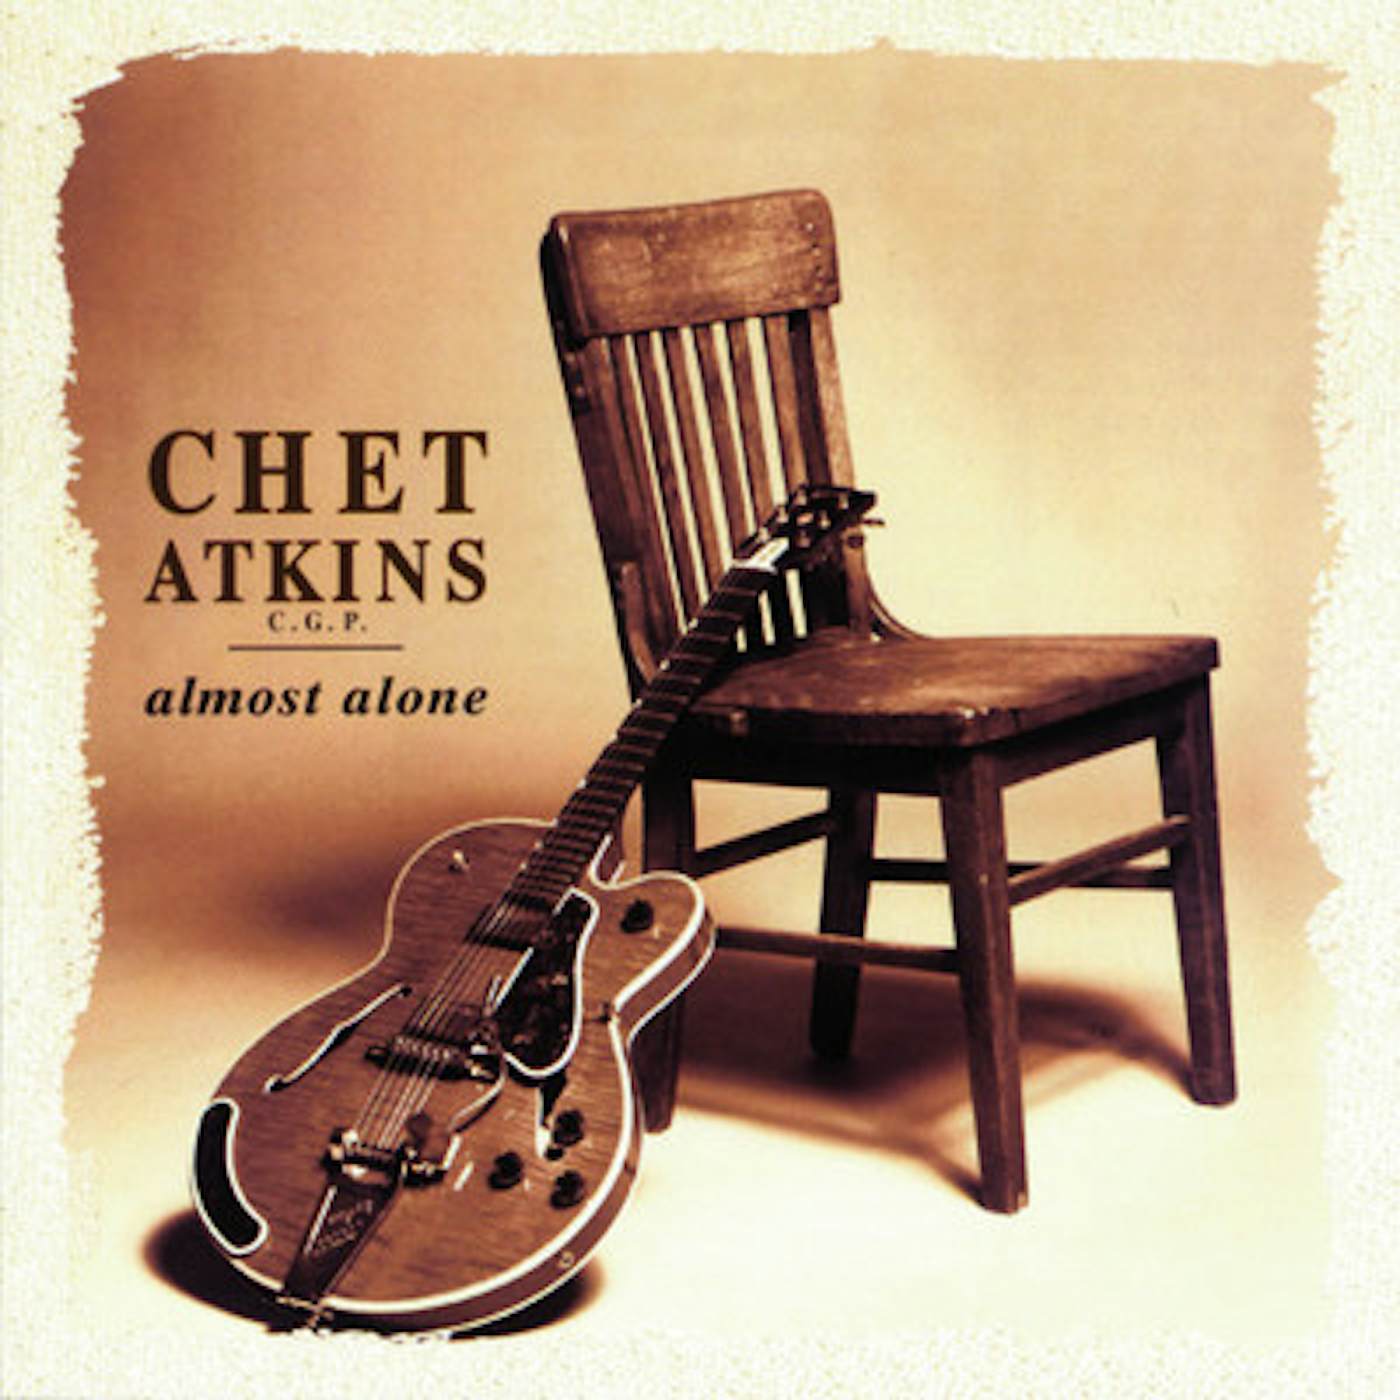 Chet Atkins ALMOST ALONE CD